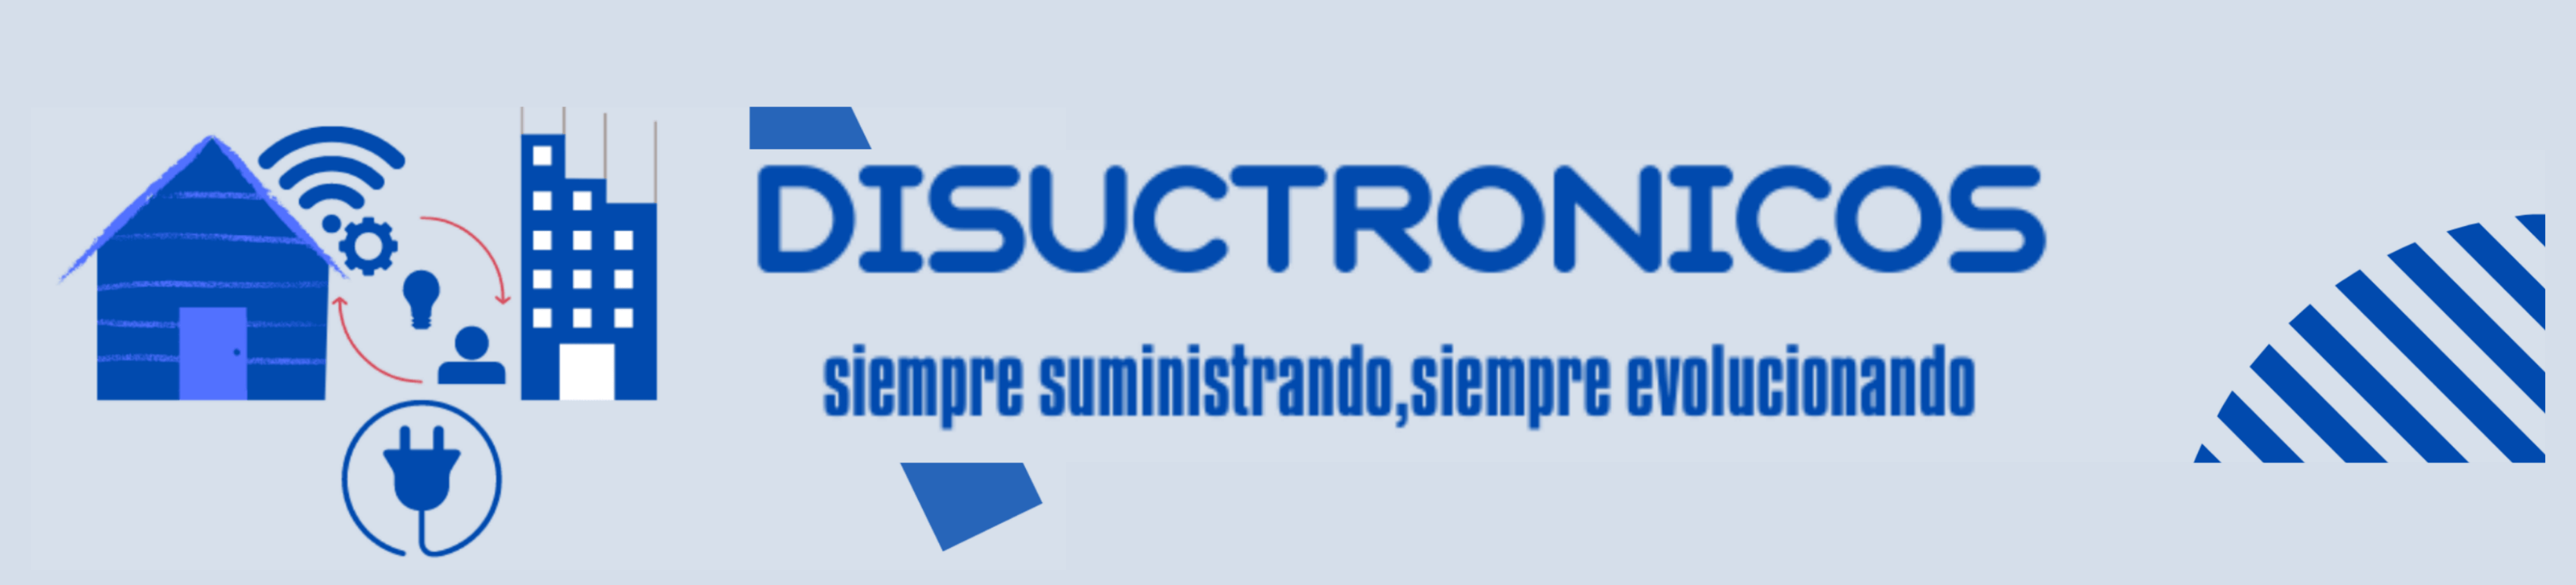 DISUCTRONICOS